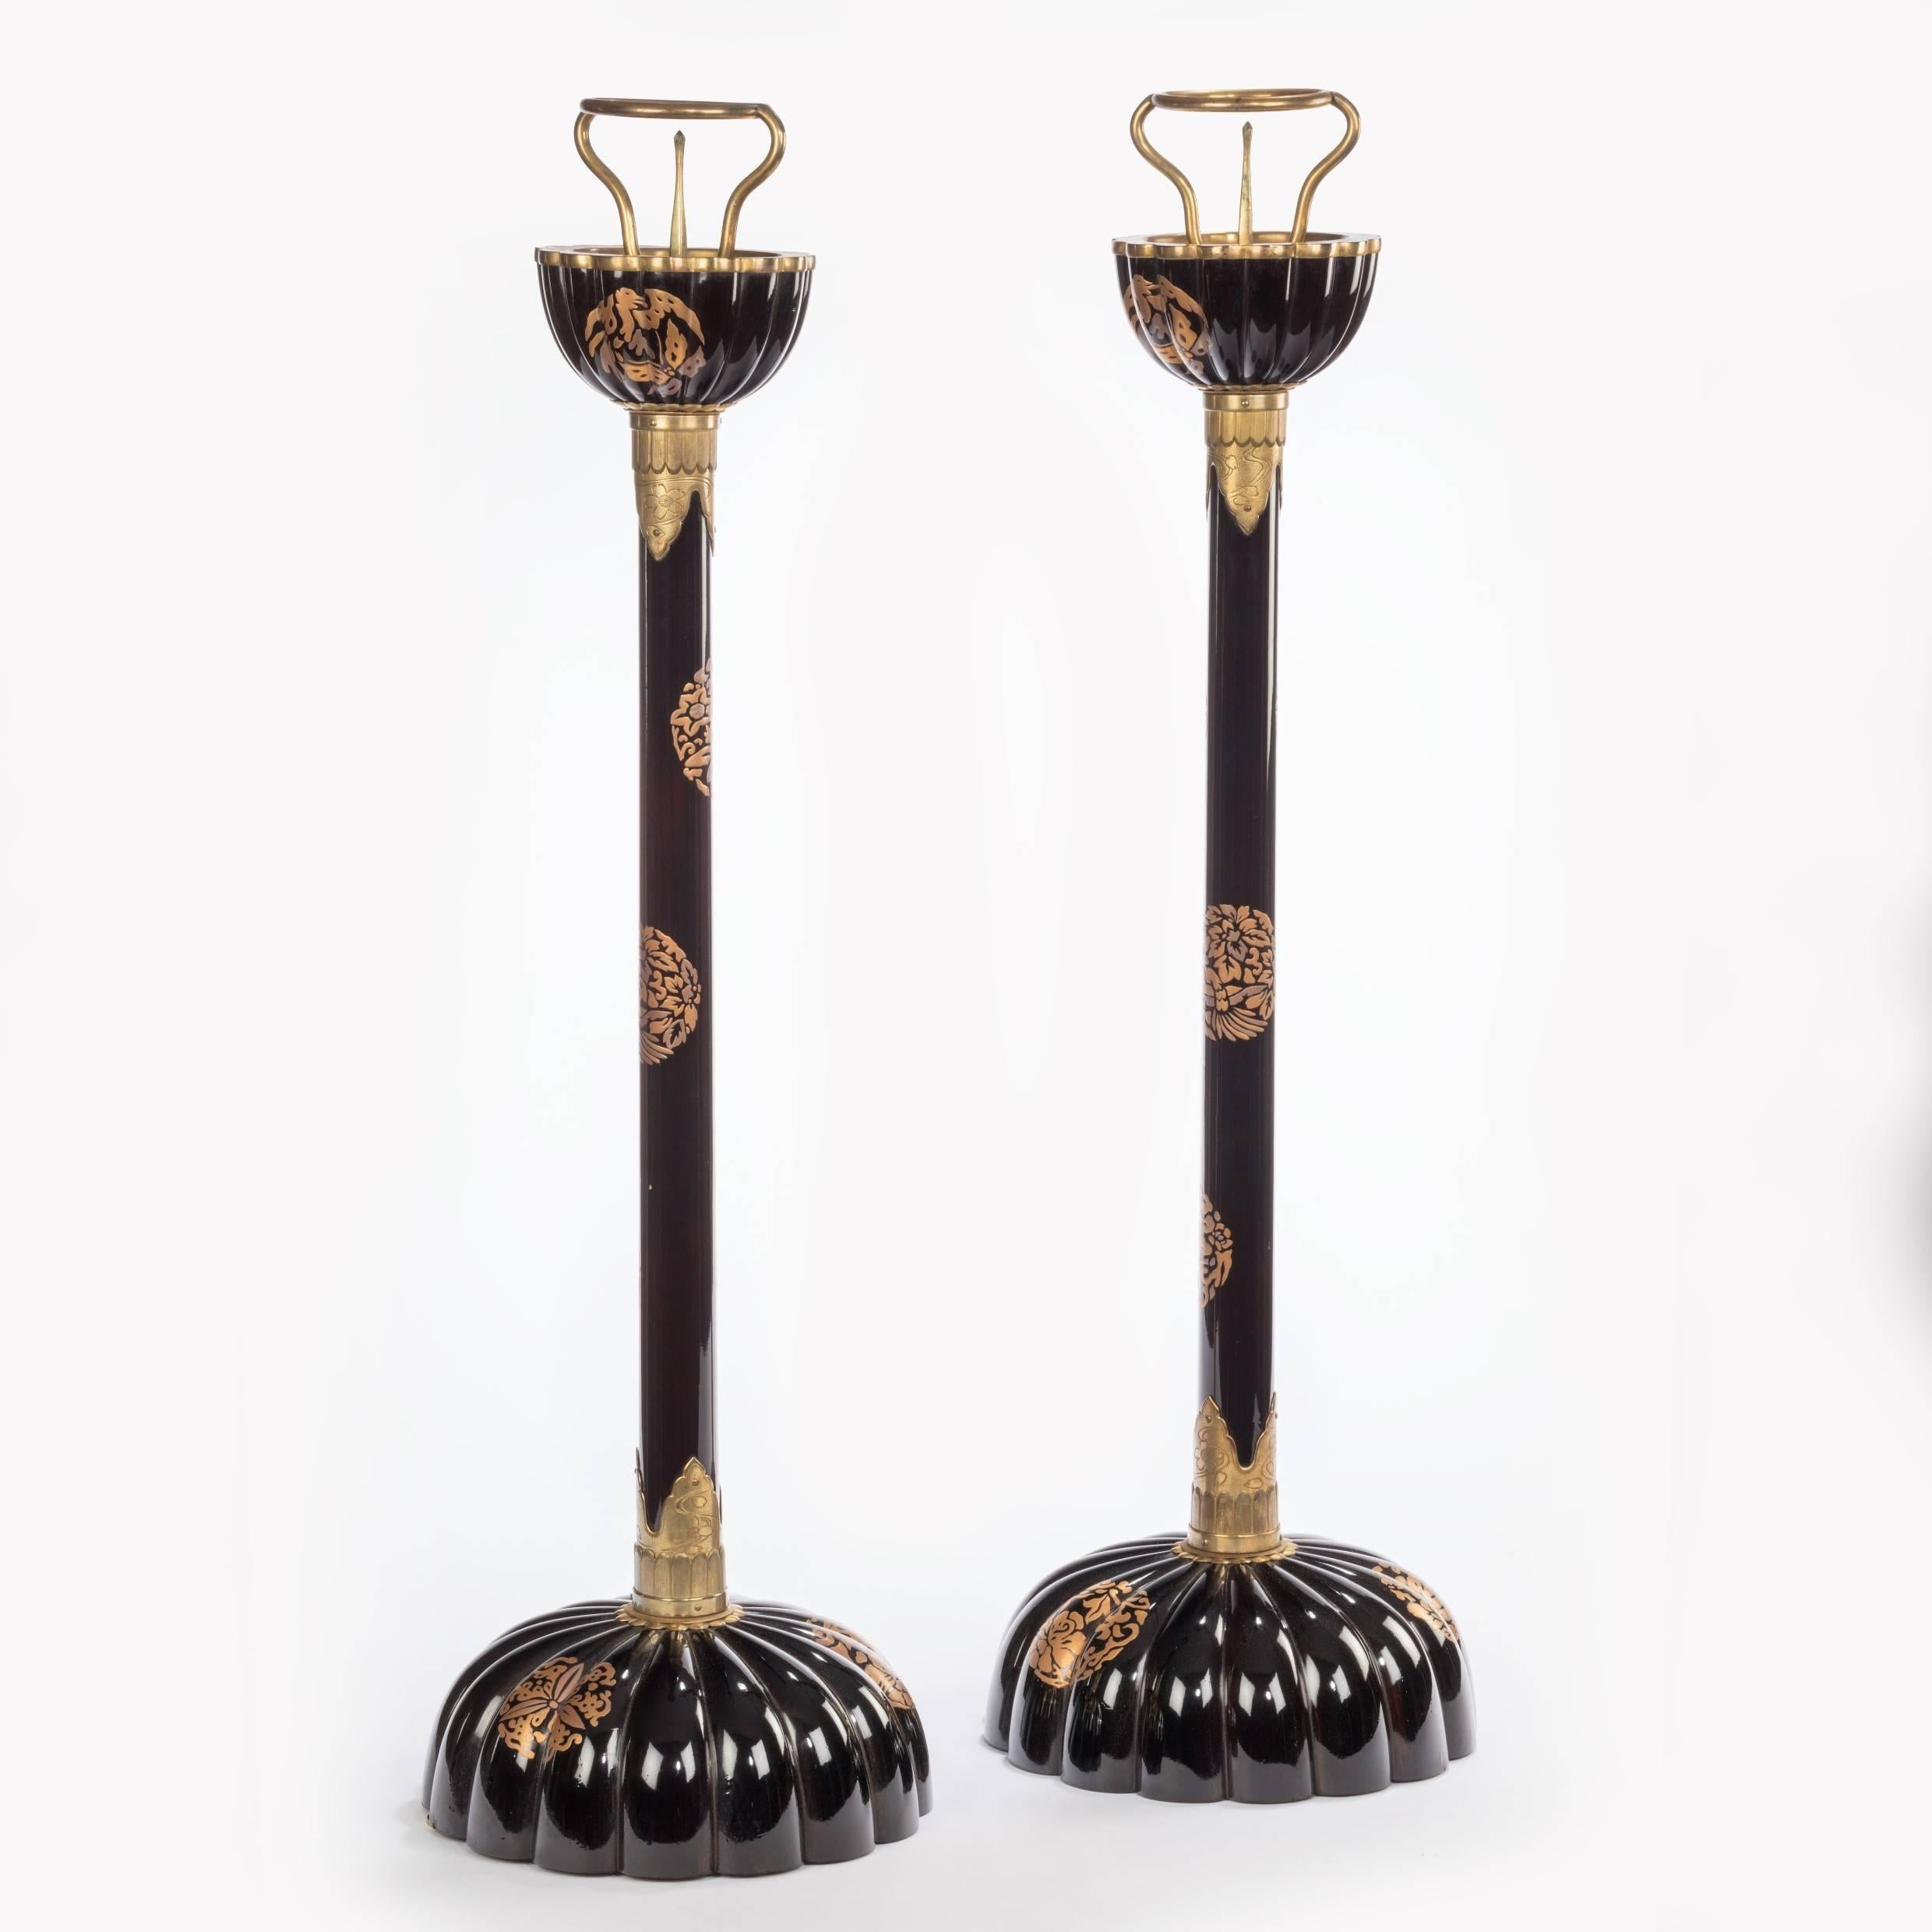 Each in with a cylindrical column rising from a stylized chrysanthemum base with a similar finial crowned by a gilt bracket and pricket for the candle, with an incised gilt metal collar and decorated with gilt mon on a black ground, with a large